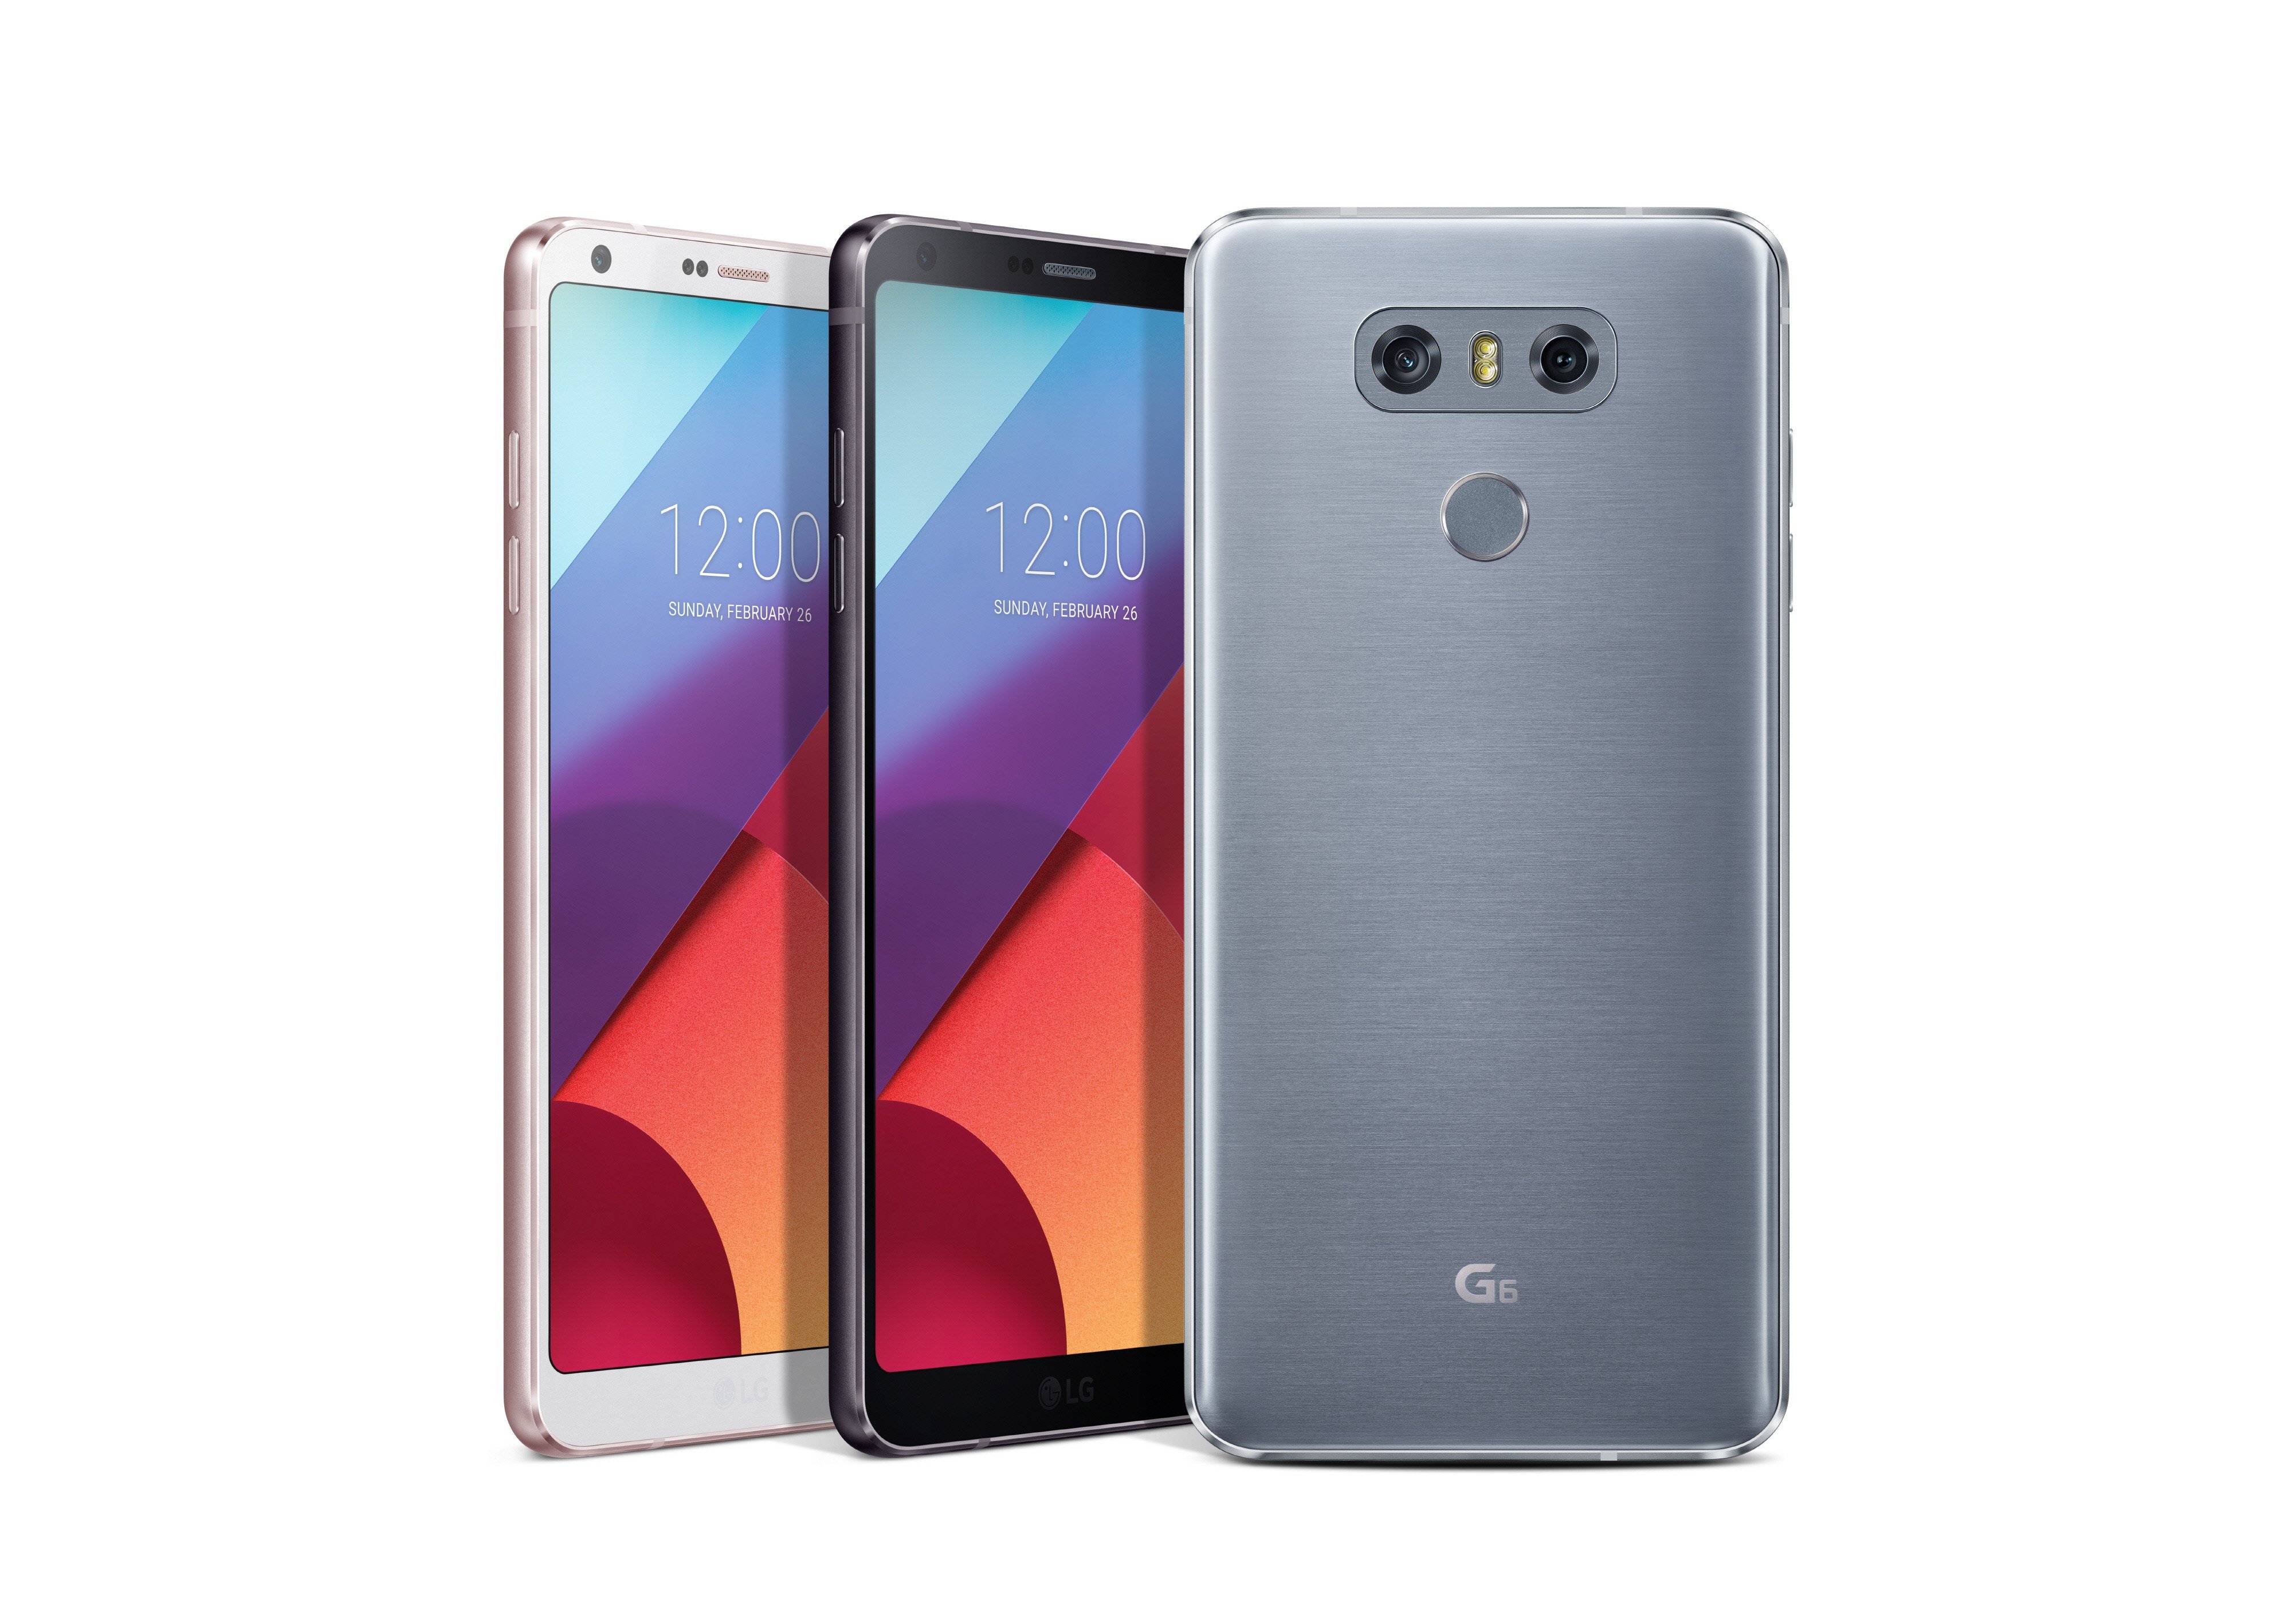 LG G6 02 REVIEW: LG G6 Goes Back To Basics But Has It Got It, To Take On The Samsung S8?